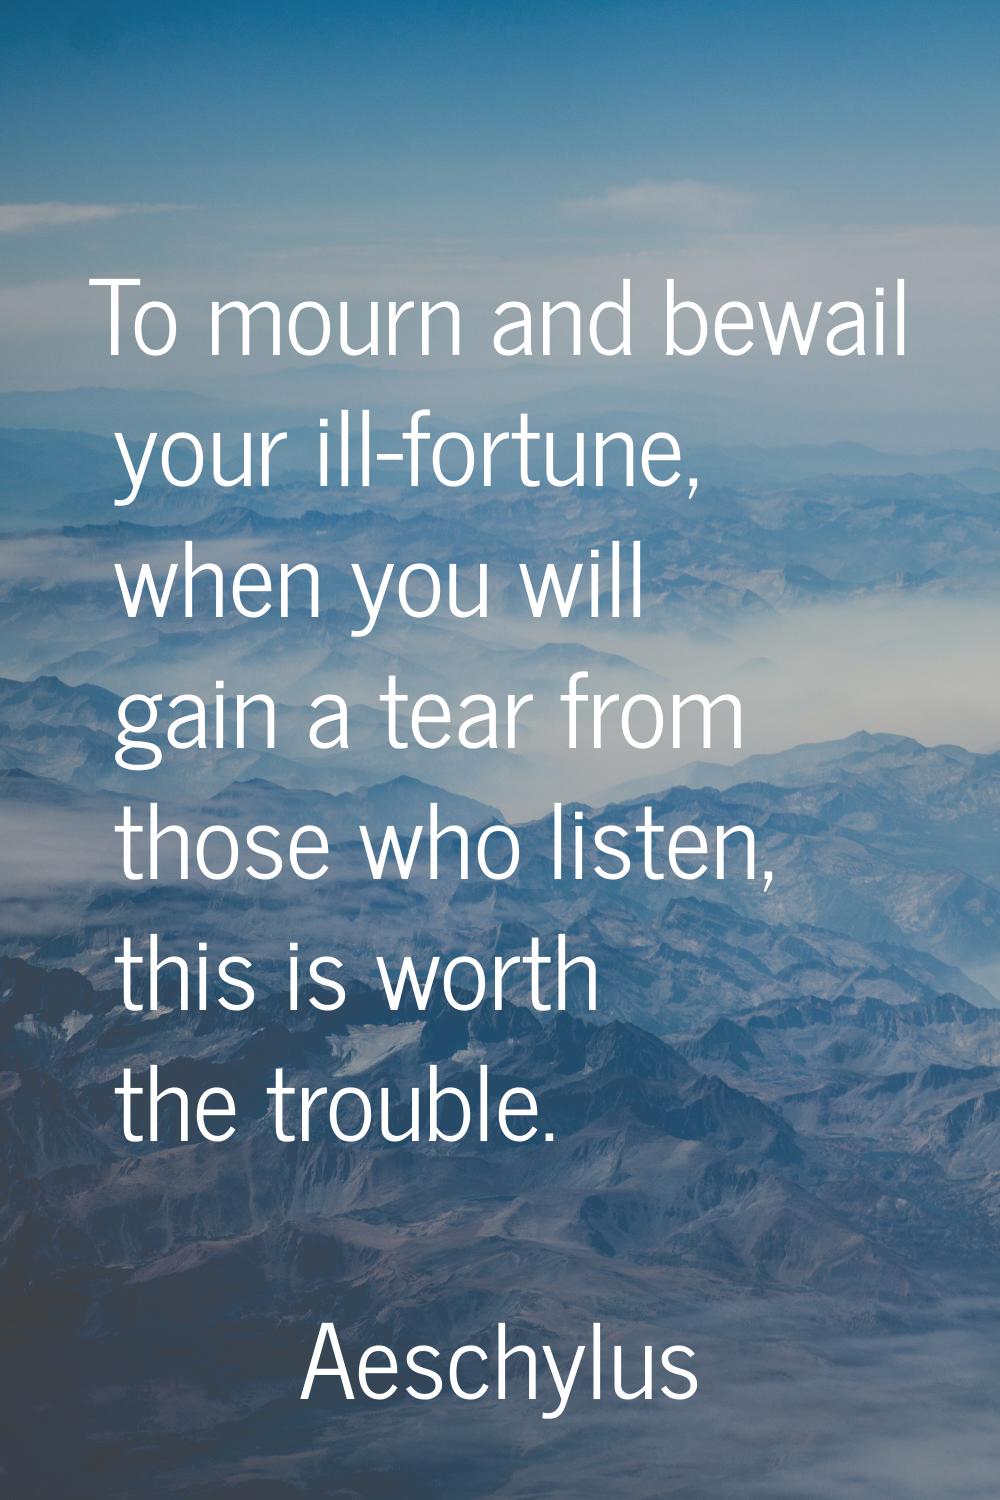 To mourn and bewail your ill-fortune, when you will gain a tear from those who listen, this is wort